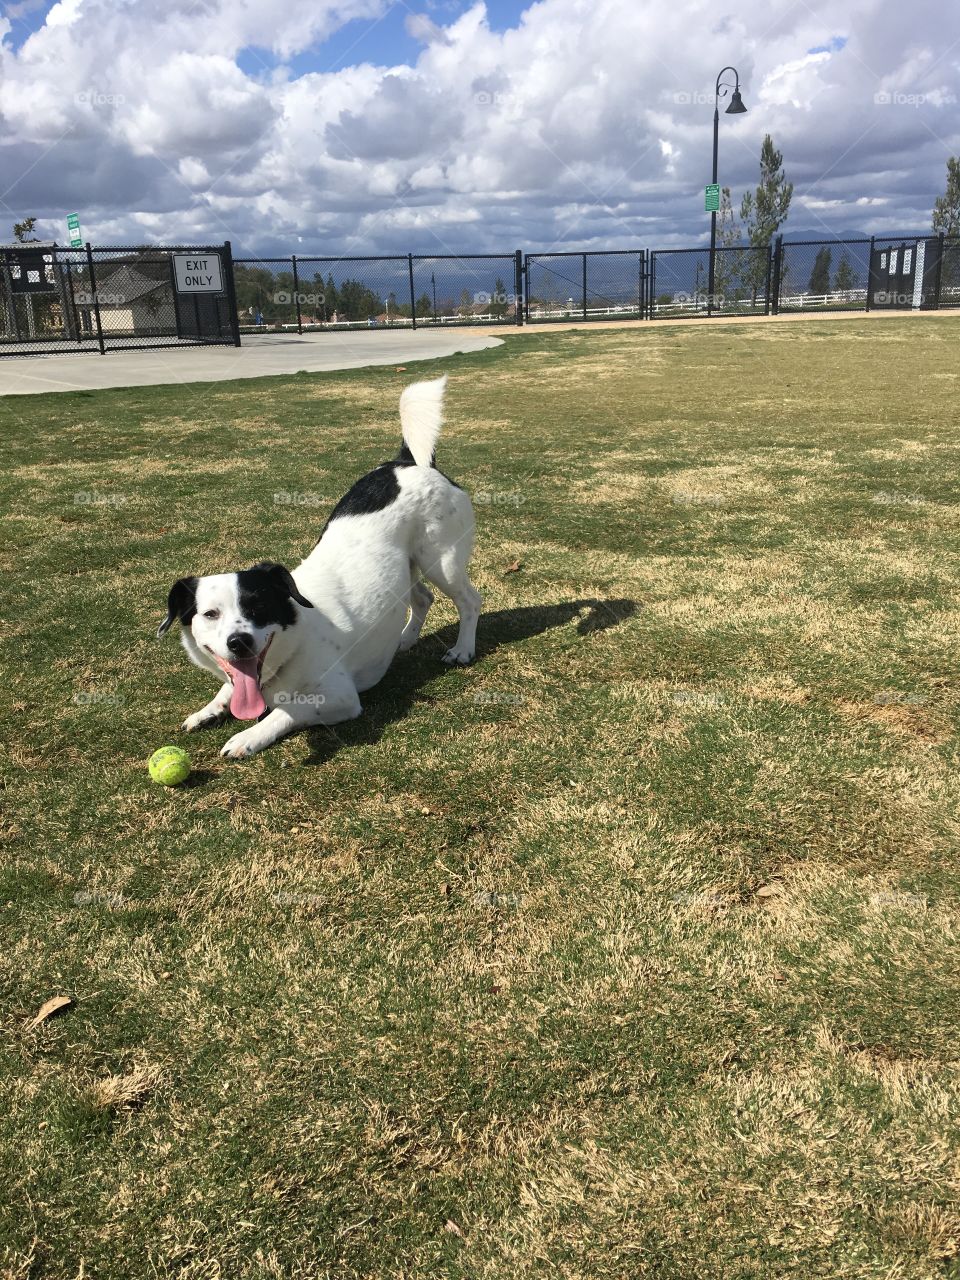 Jax the jack Russell mix playing at the dog park.